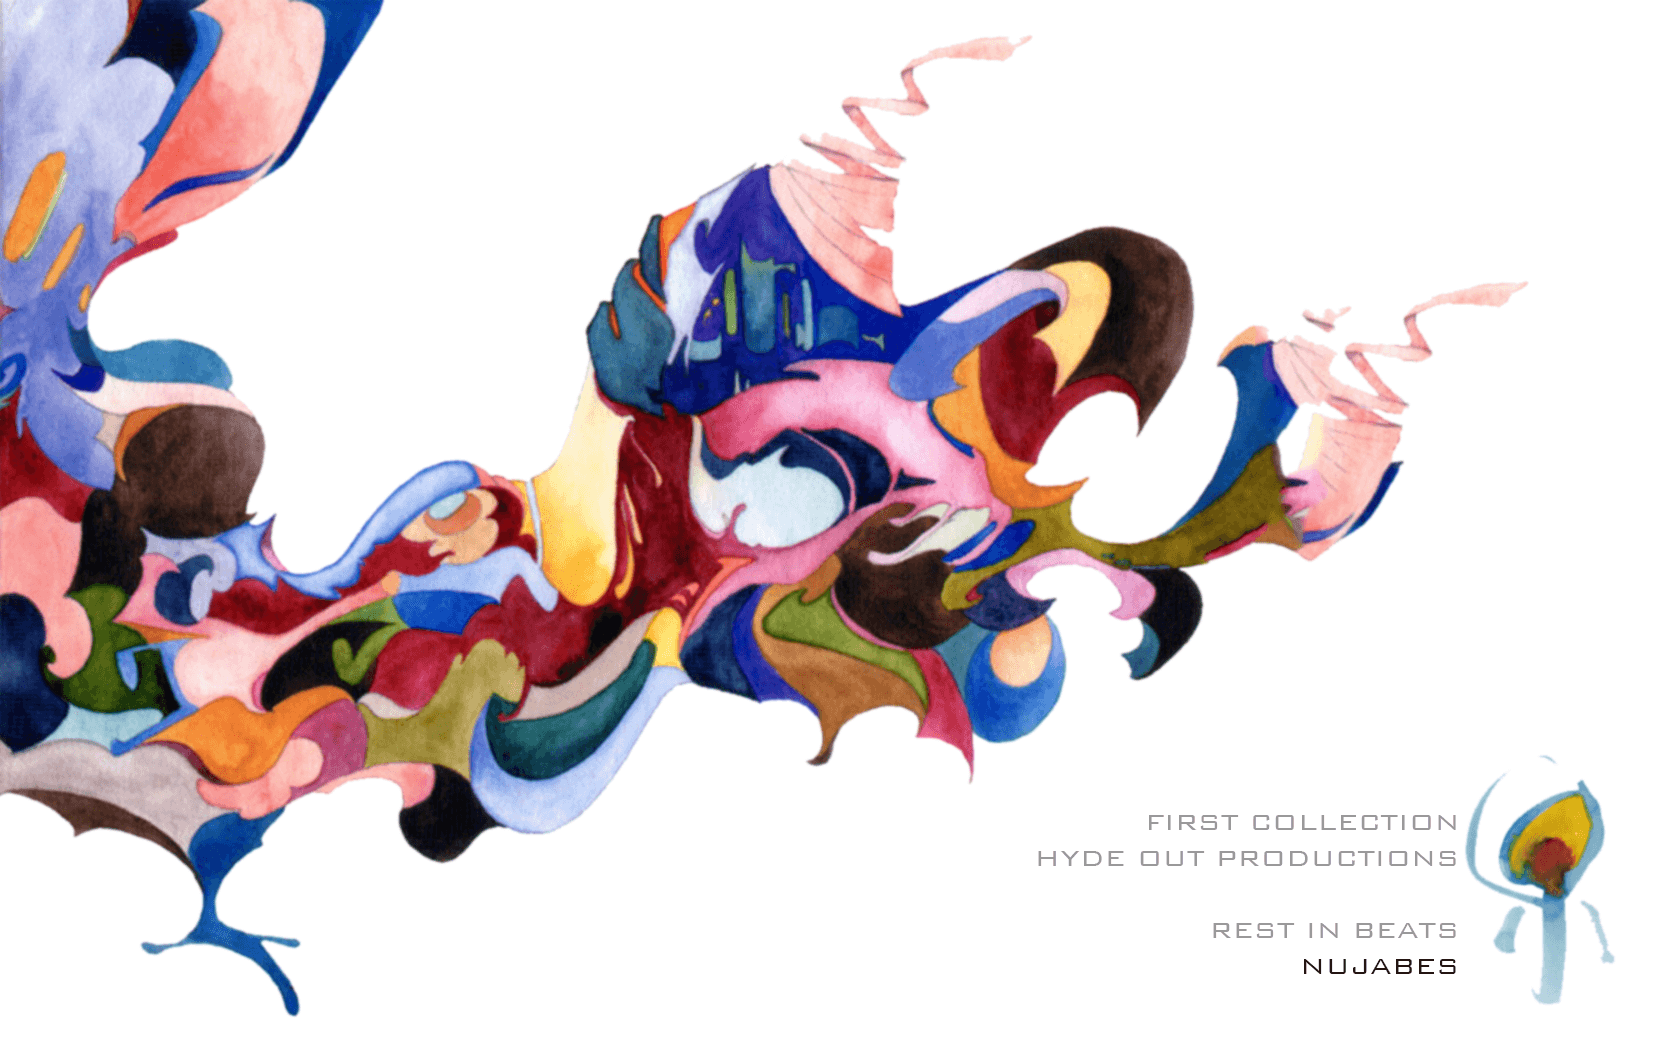 I made this is wallpaper from the artwork of Nujabes' album